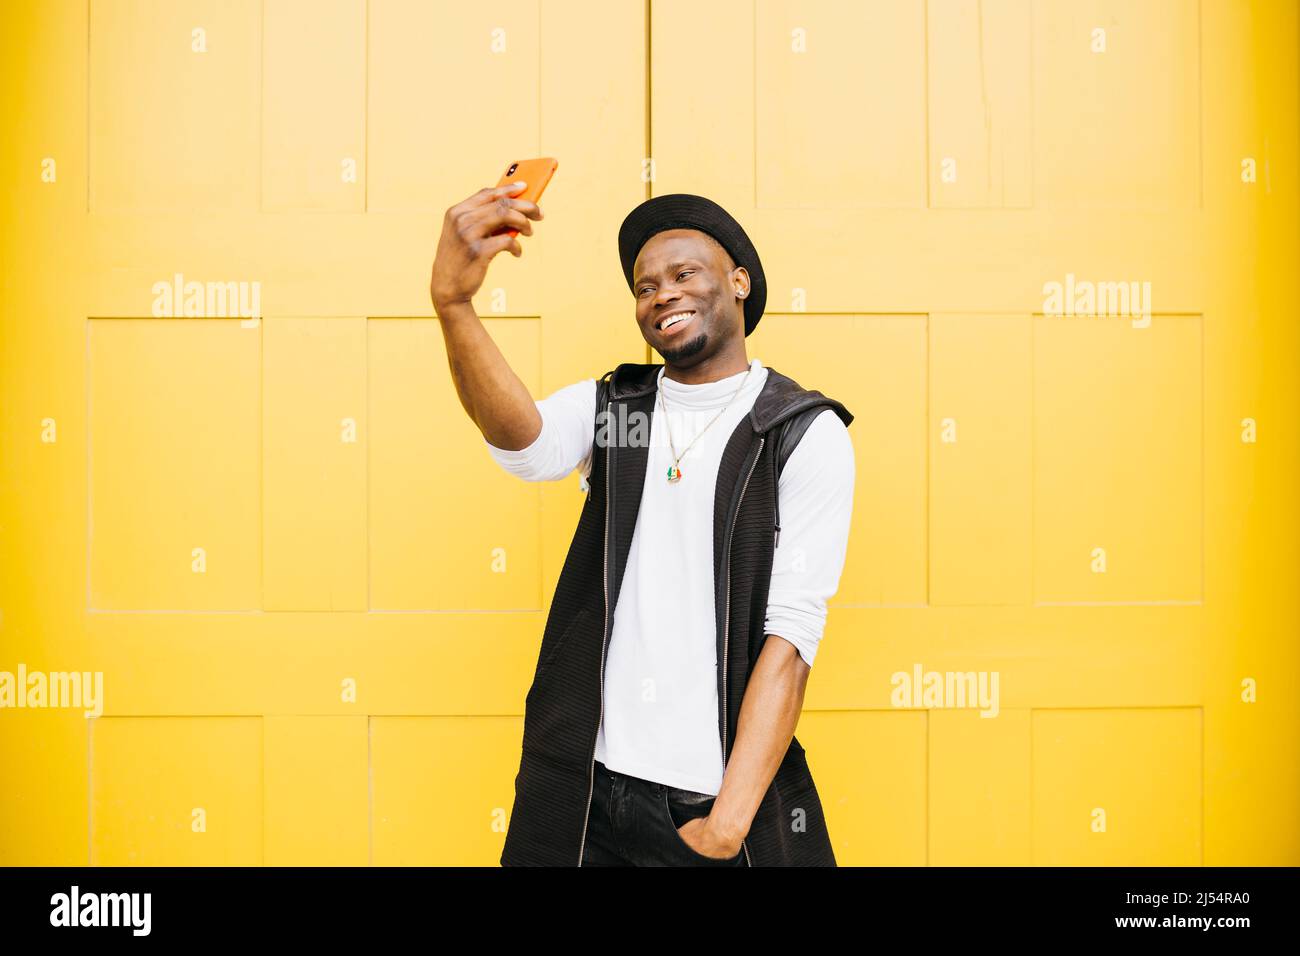 Portrait of a young smiling black male taking a selfie standing against a yellow door Stock Photo